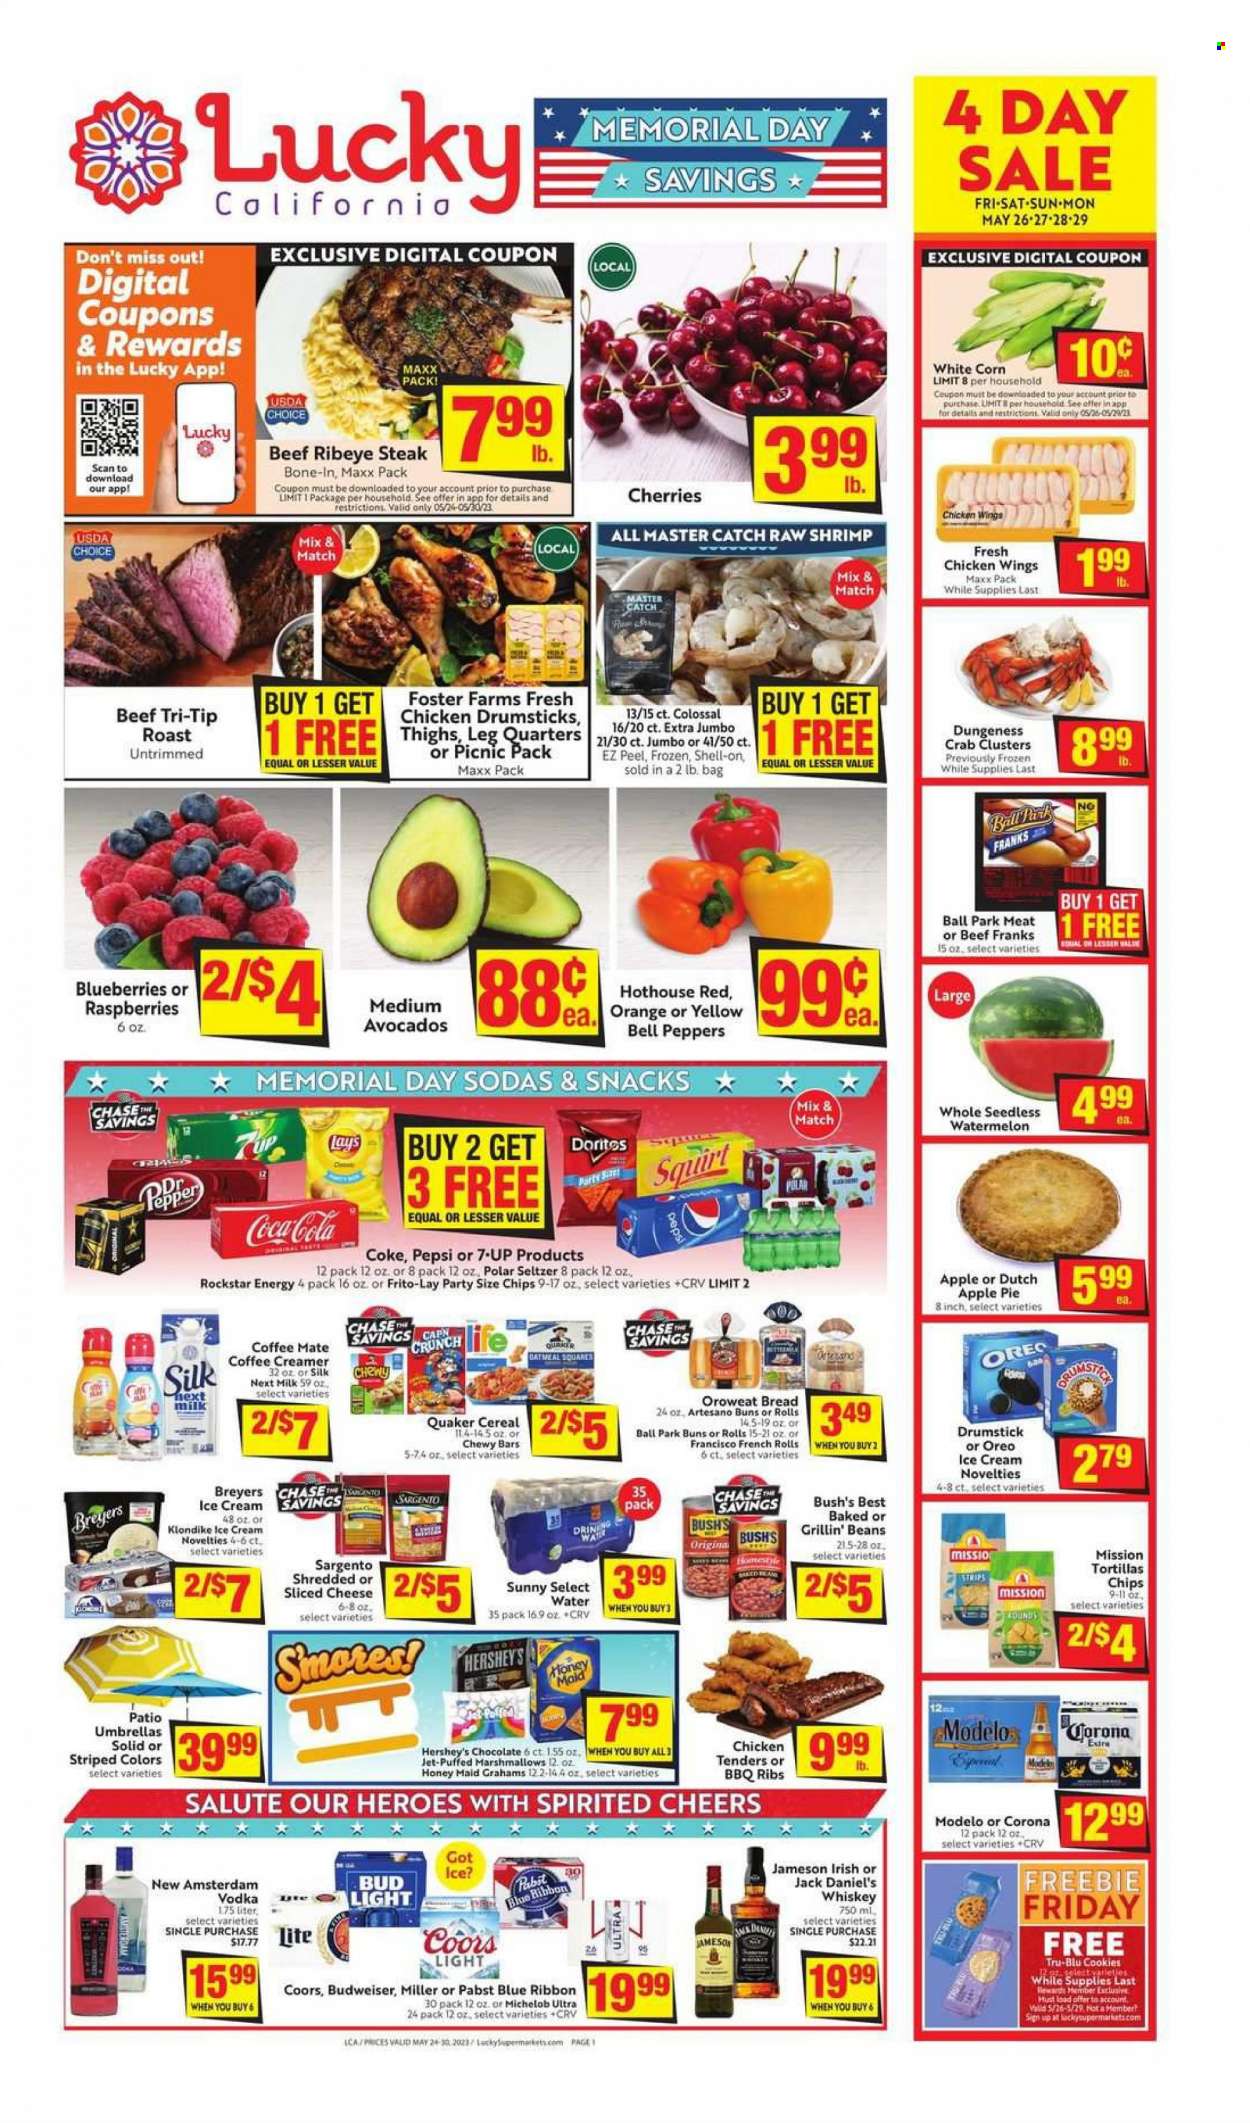 thumbnail - Lucky California Flyer - 05/24/2023 - 05/30/2023 - Sales products - bread, tortillas, pie, buns, apple pie, bell peppers, corn, peppers, avocado, blueberries, raspberries, watermelon, crab, shrimps, crab clusters, Jack Daniel's, chicken tenders, Quaker, roast, ready meal, snack, frankfurters, shredded cheese, sliced cheese, Sargento, Oreo, Coffee-Mate, milk, Silk, creamer, ice cream, Hershey's, chicken wings, strips, cookies, marshmallows, Doritos, Frito-Lay, salty snack, oatmeal, baked beans, cereals, Honey Maid, Coca-Cola, Pepsi, soft drink, 7UP, Rockstar, Coke, seltzer water, water, vodka, whiskey, Jameson, whisky, beer, Bud Light, Corona Extra, Modelo, Pabst Blue Ribbon, Pabst, chicken drumsticks, chicken, beef meat, beef steak, steak, ribeye steak, ribs, Budweiser, Coors, Michelob. Page 1.